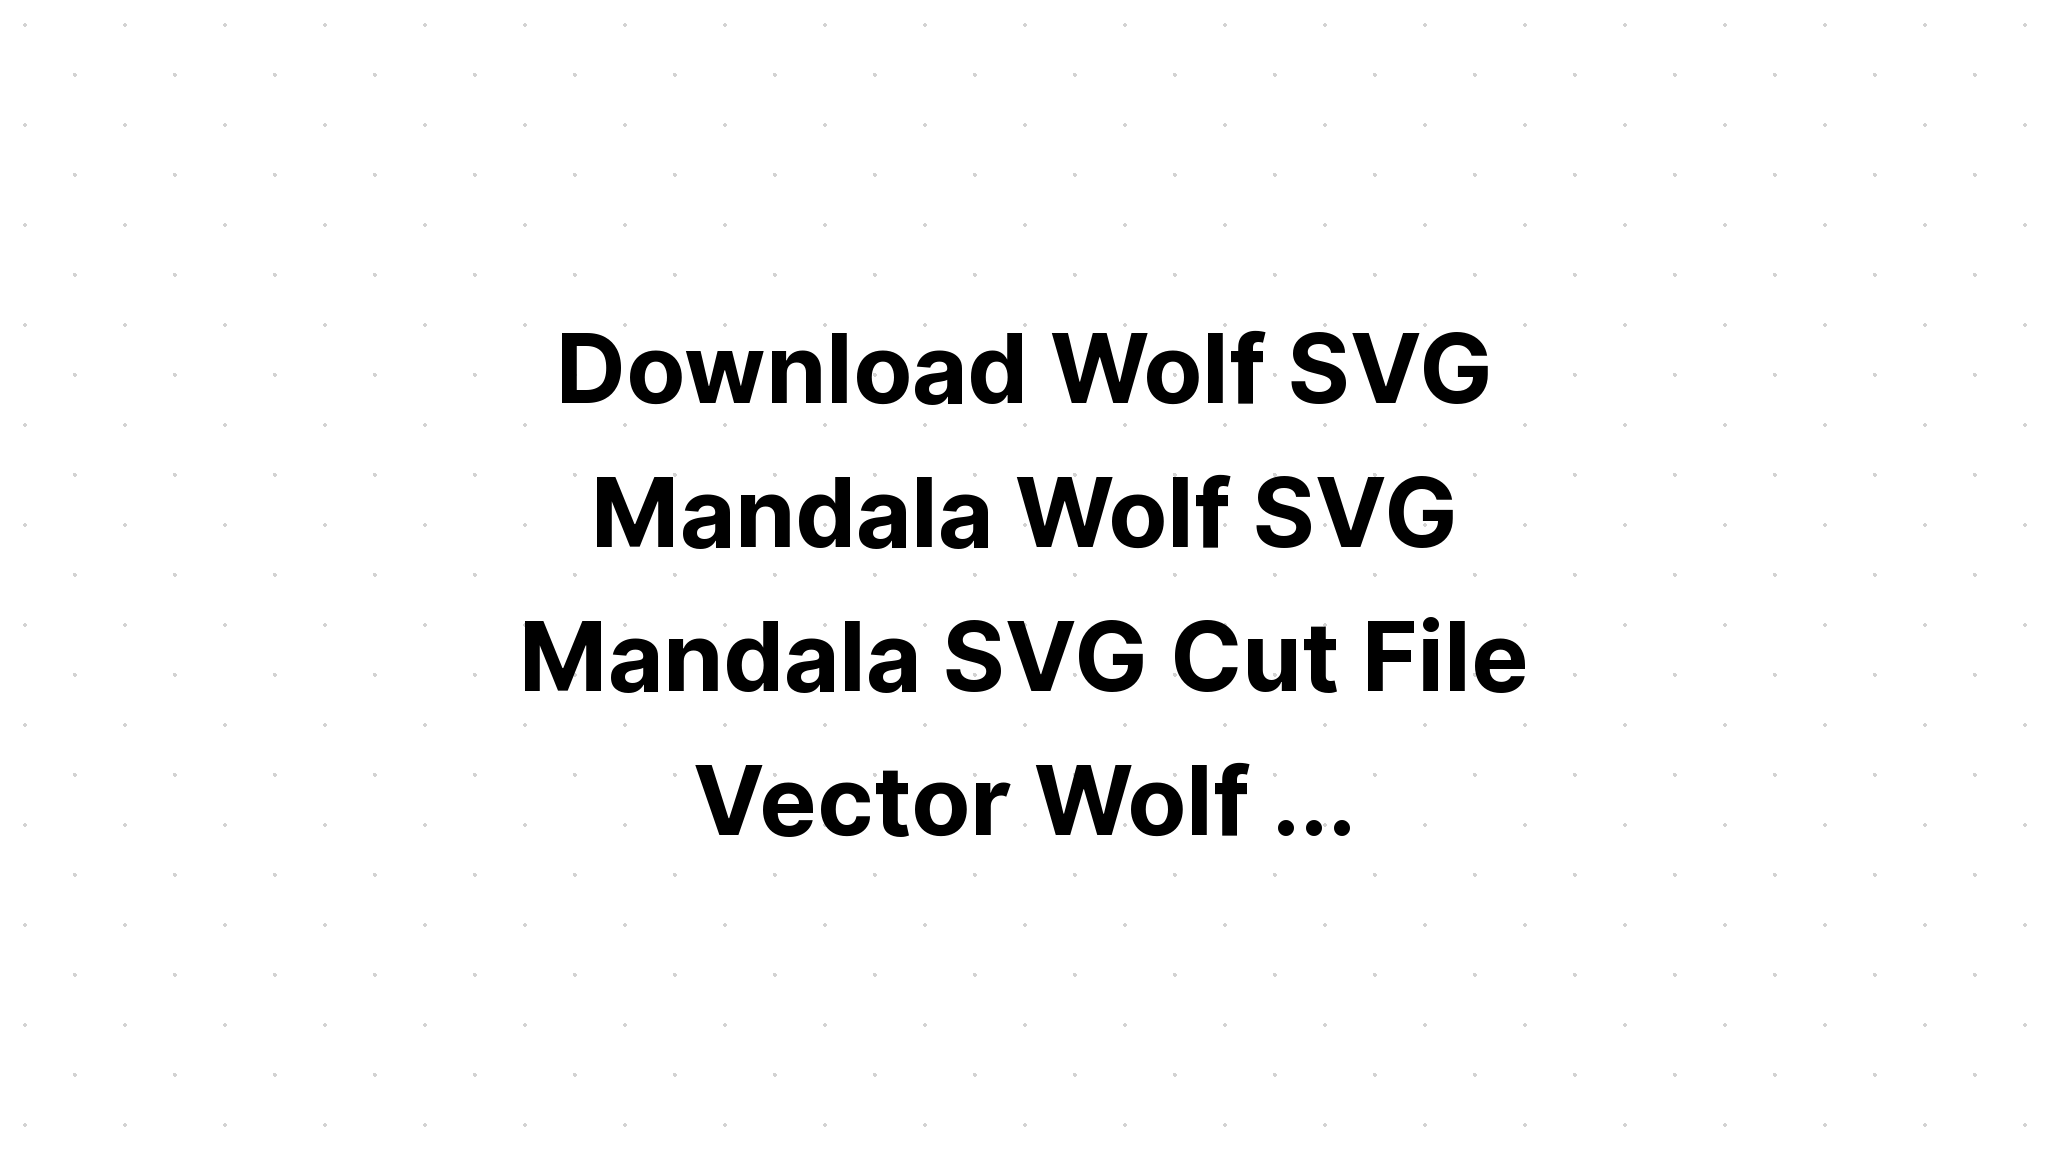 Download Mandala Wolf Svg Free For Silhouette - Layered SVG Cut File